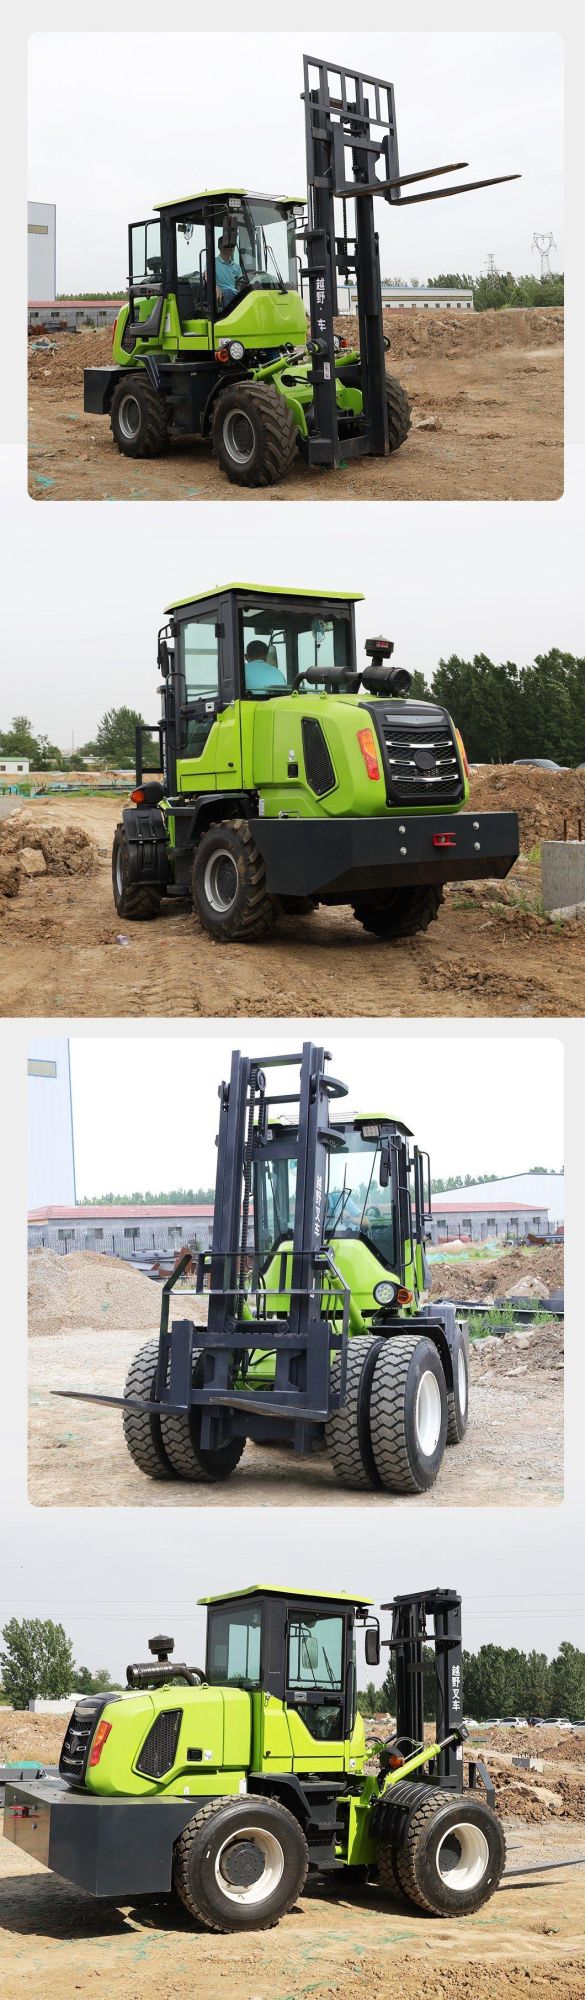 Hot-Selling Cross-Country Forklift to Lifting 3-6 Meters High on The Outdoor Muddy Road and Construction Site 3.5 Ton Forklift for Sale